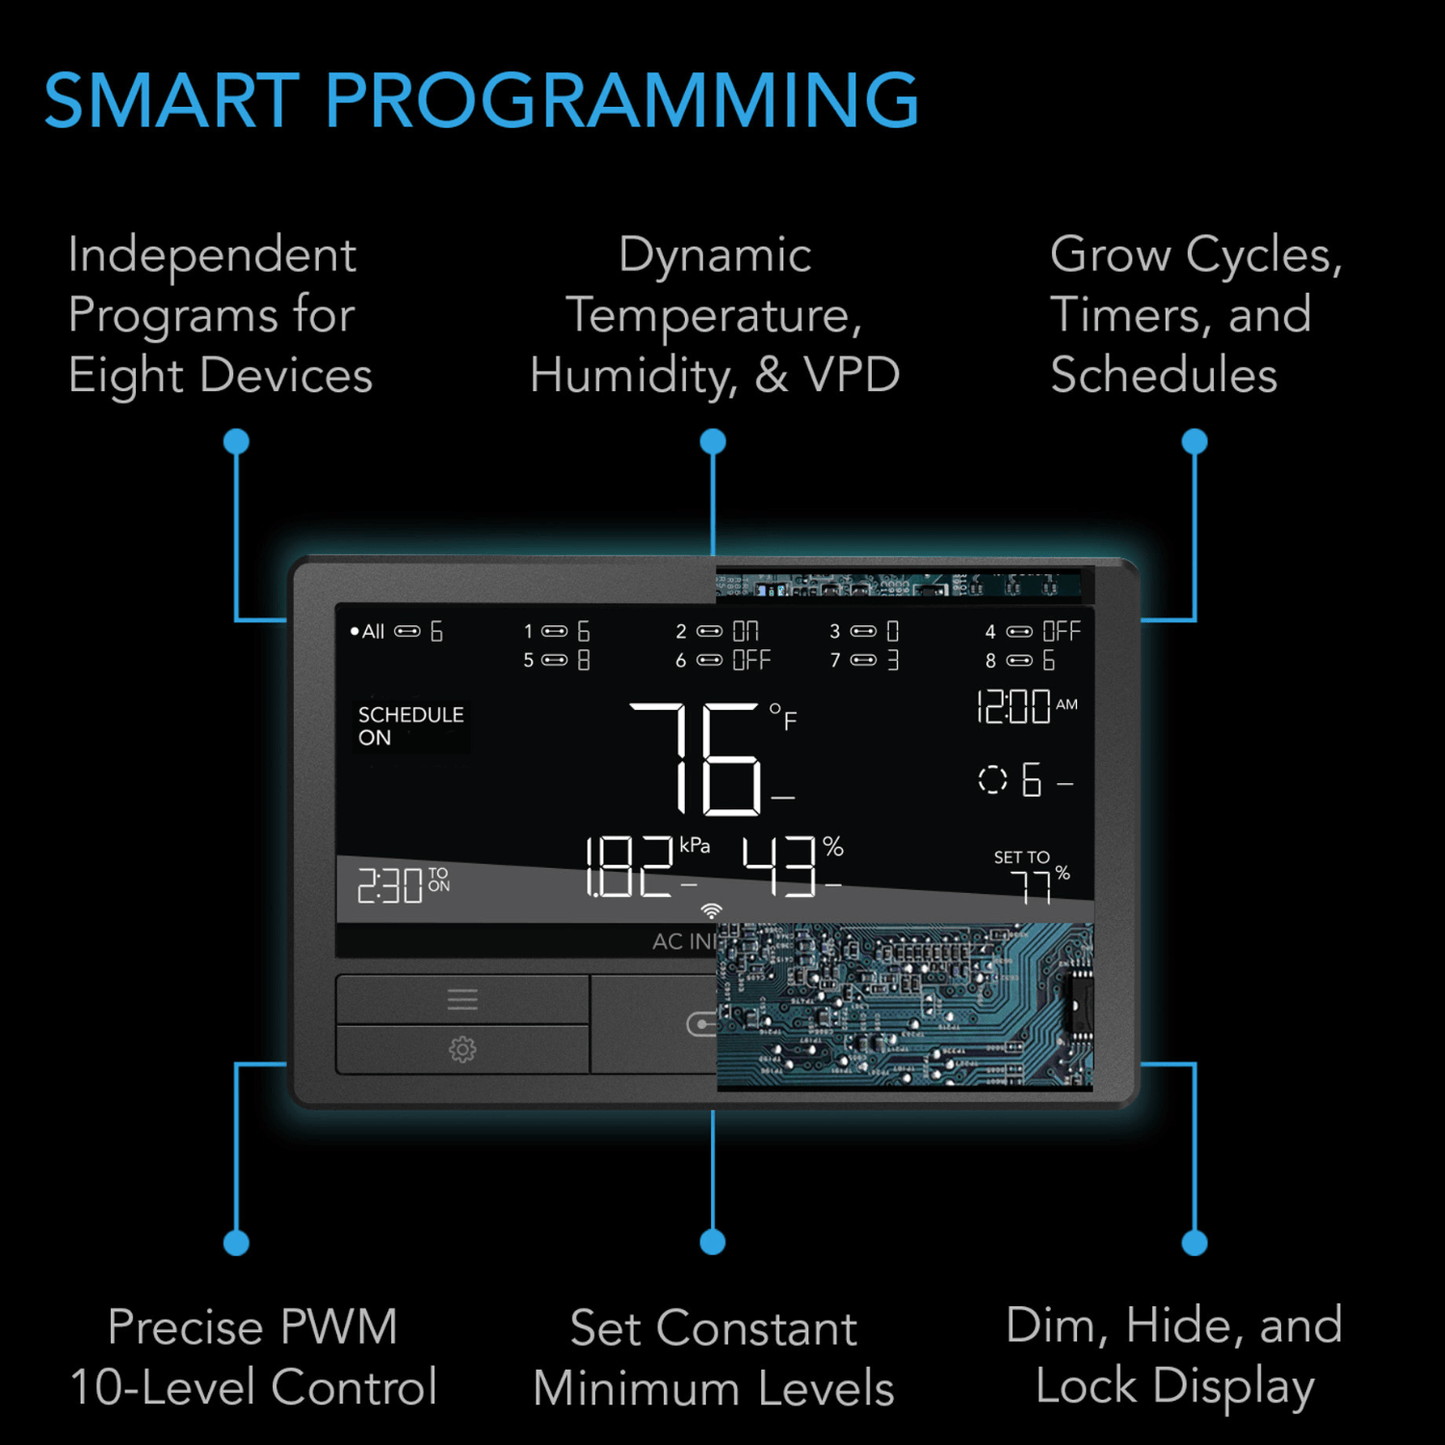 AC Infinity CONTROLLER 69 PRO+, Independent Programs for Eight Devices, Dynamic VPD, Temperature, Humidity, Scheduling, Cycles, Levels Control, Data App, Bluetooth + WiFi CTR69Q Climate Control